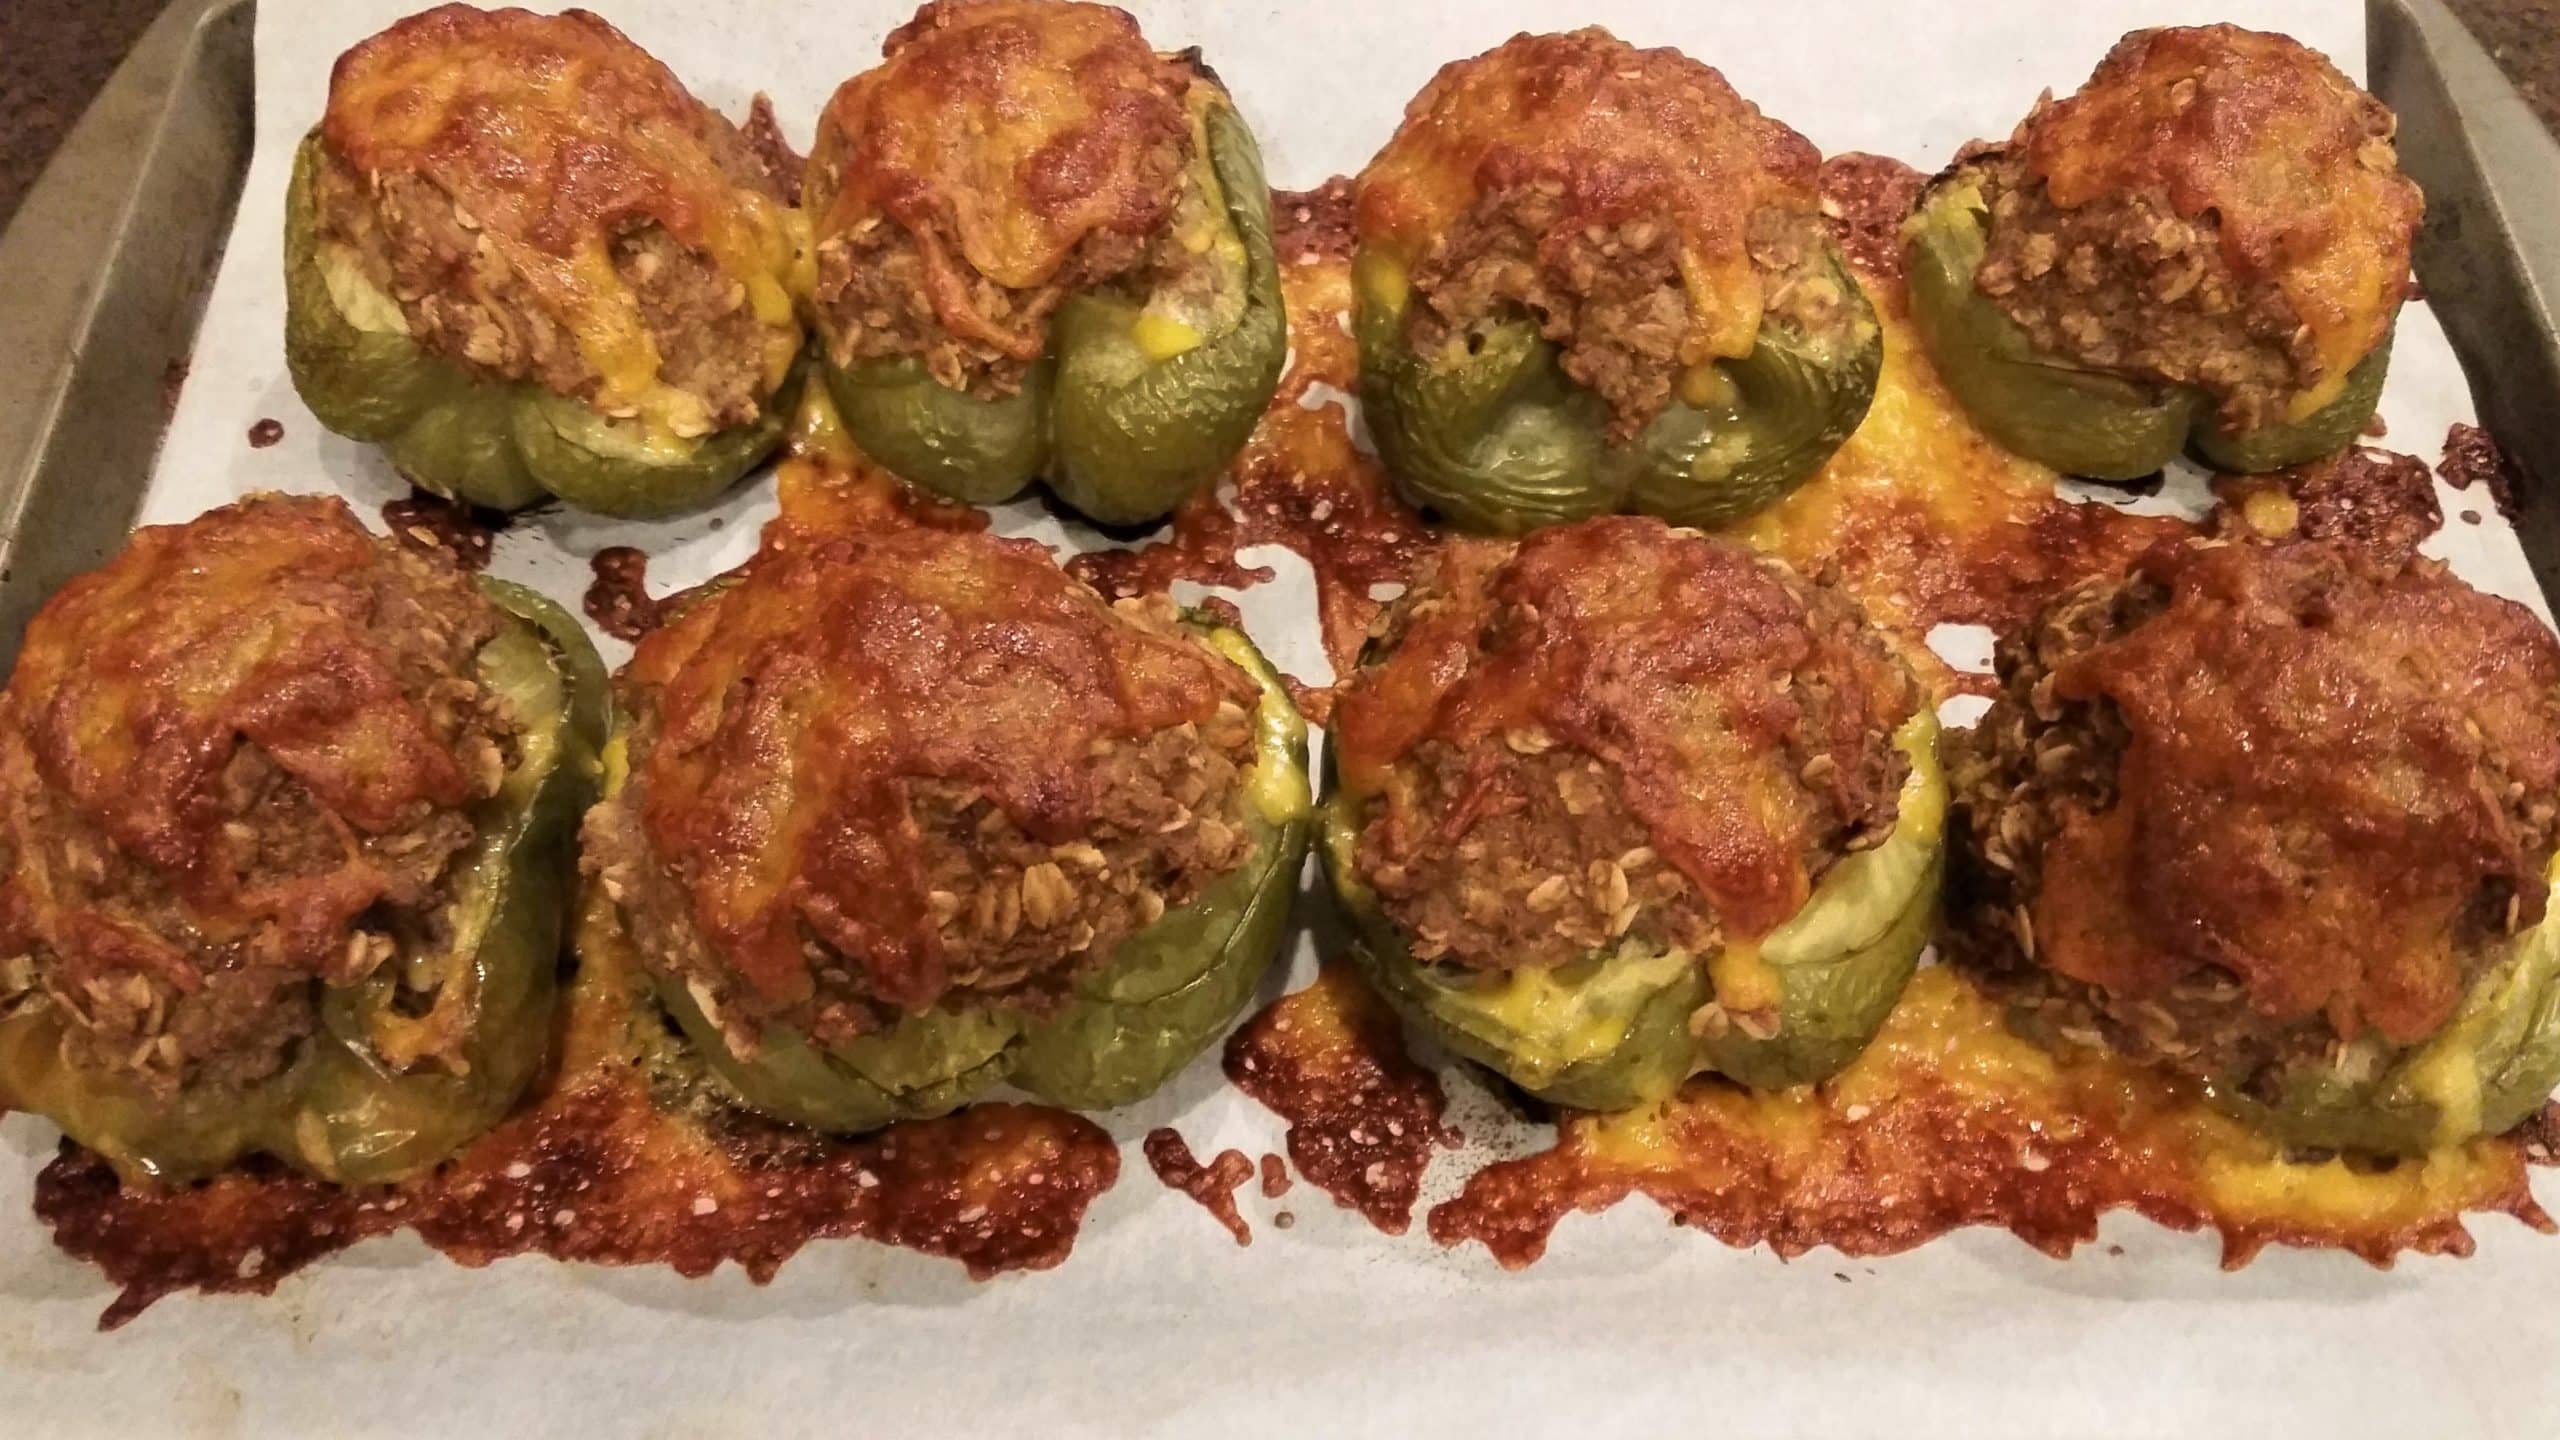 Taco Turkey Meatloaf Stuffed Bell Peppers ready to eat - Dining in with Danielle